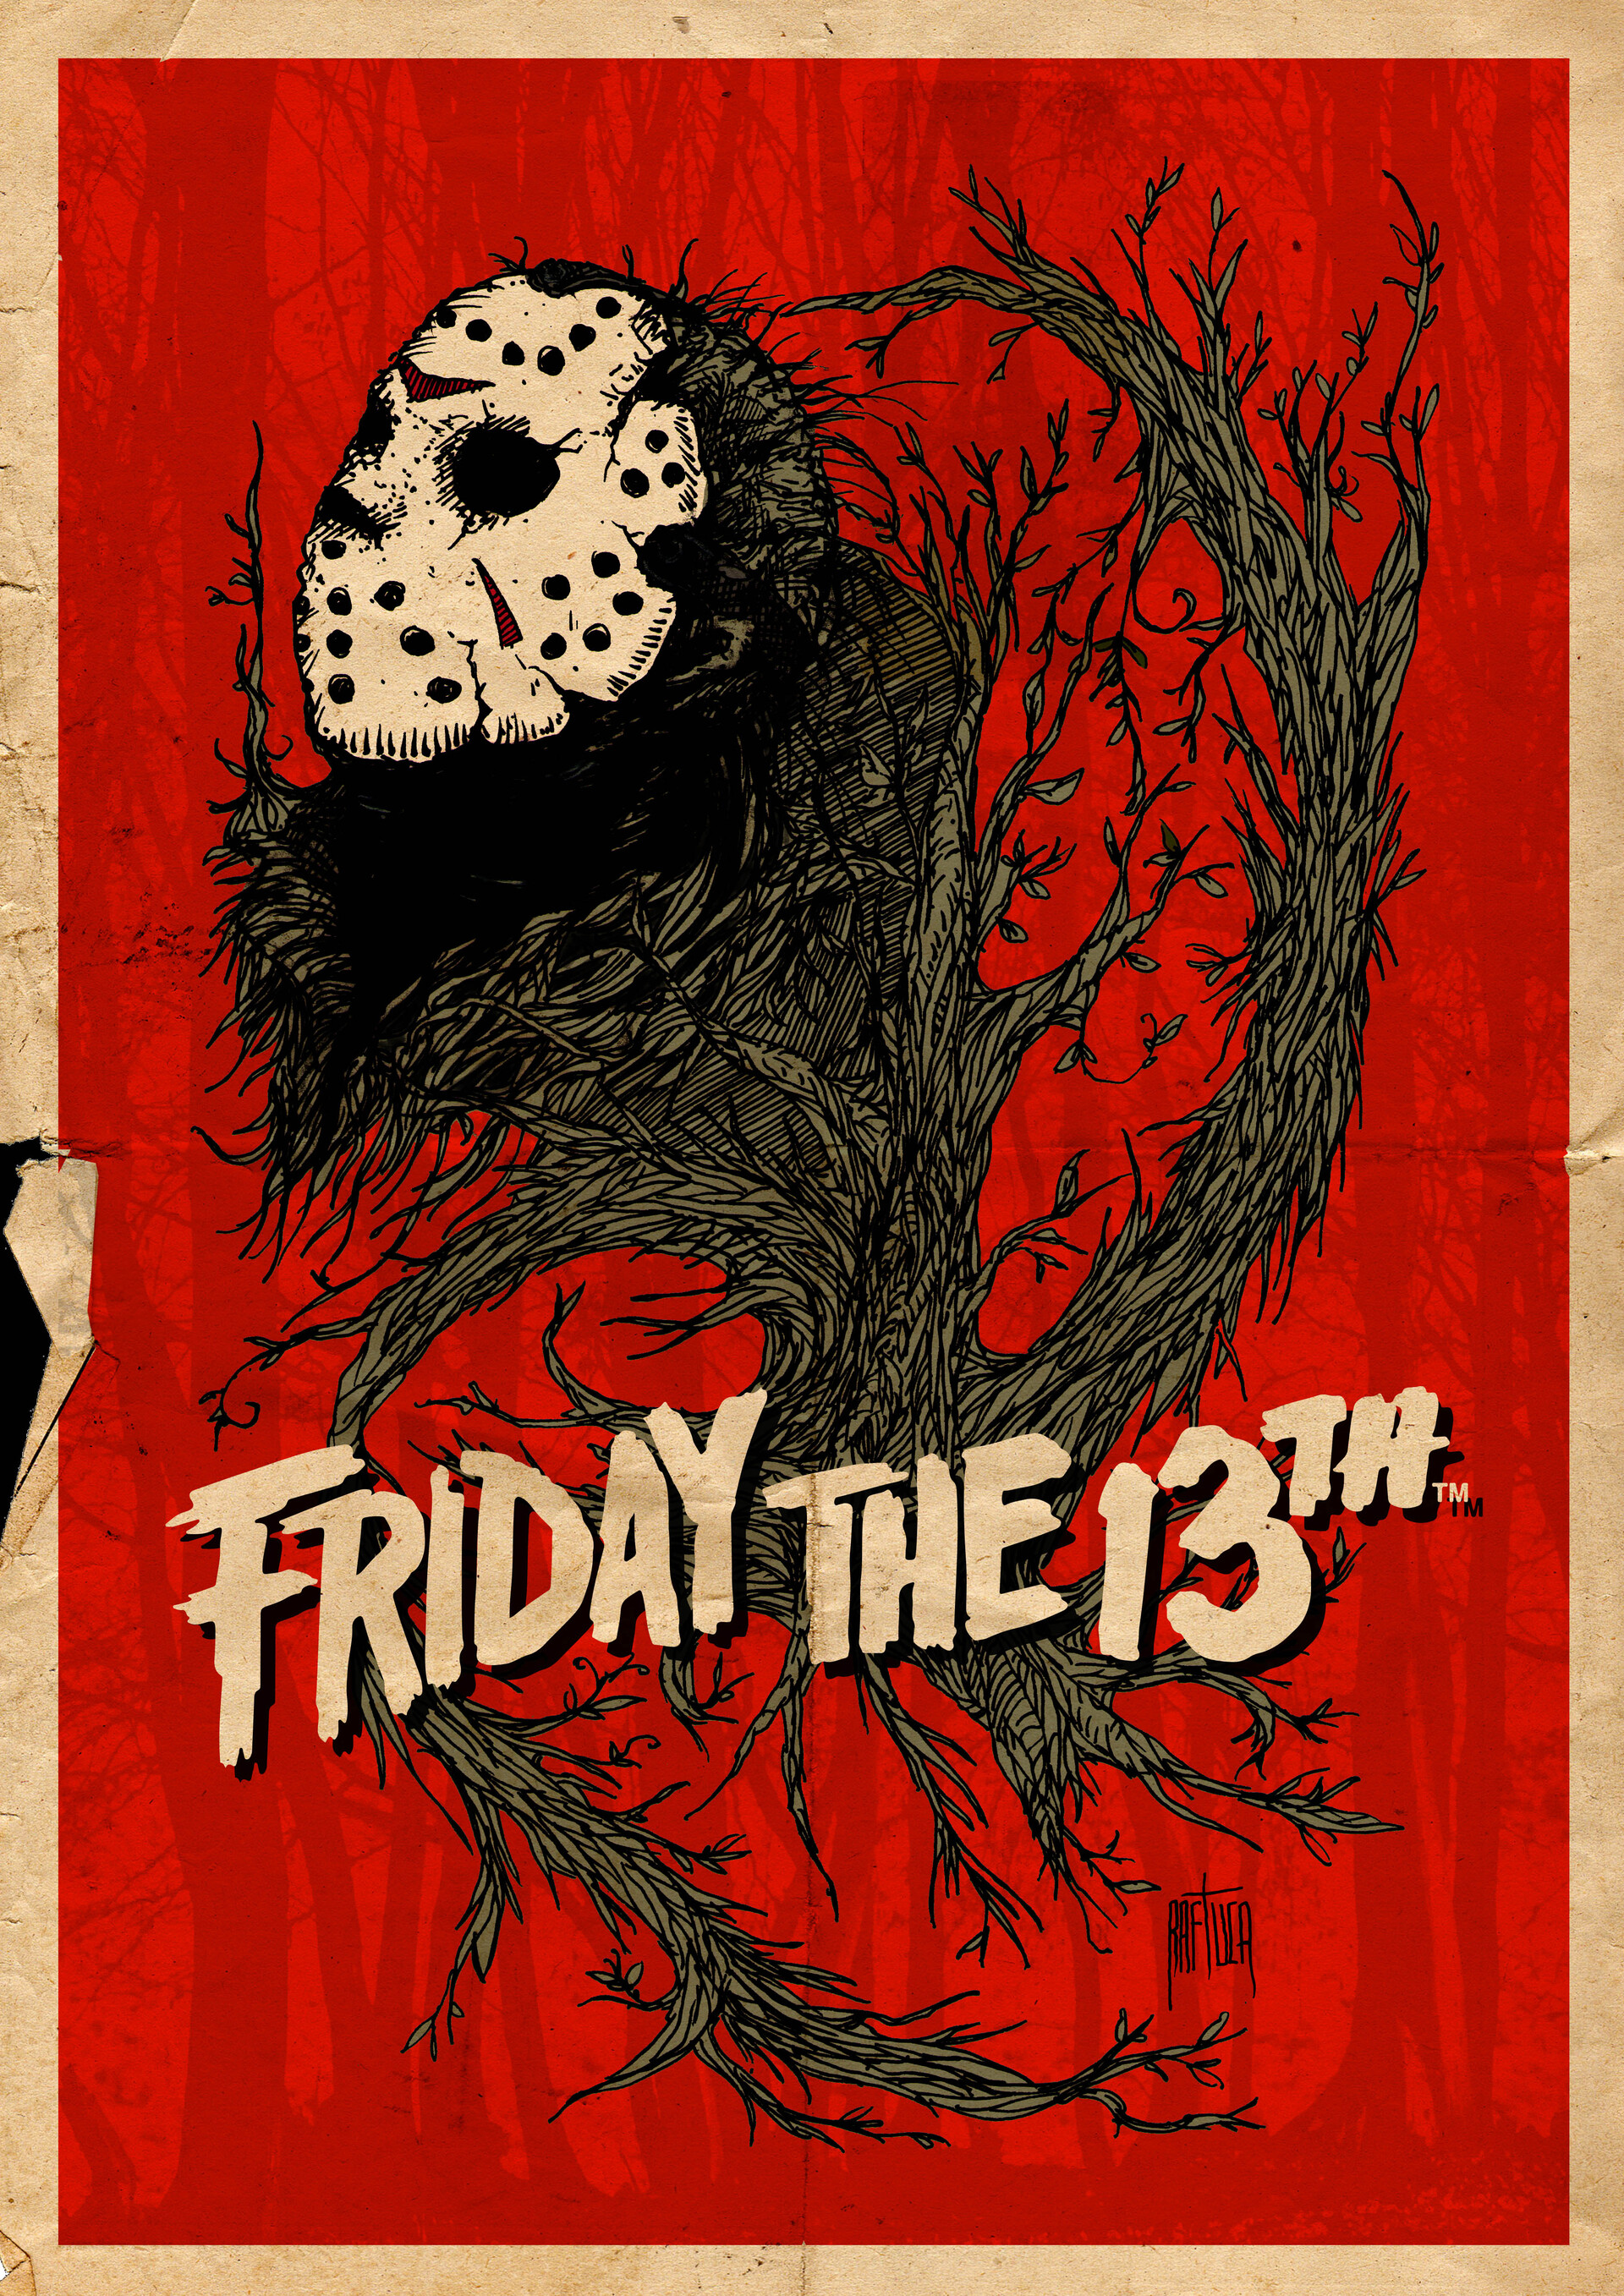 ArtStation - Friday the 13th Fan Made poster